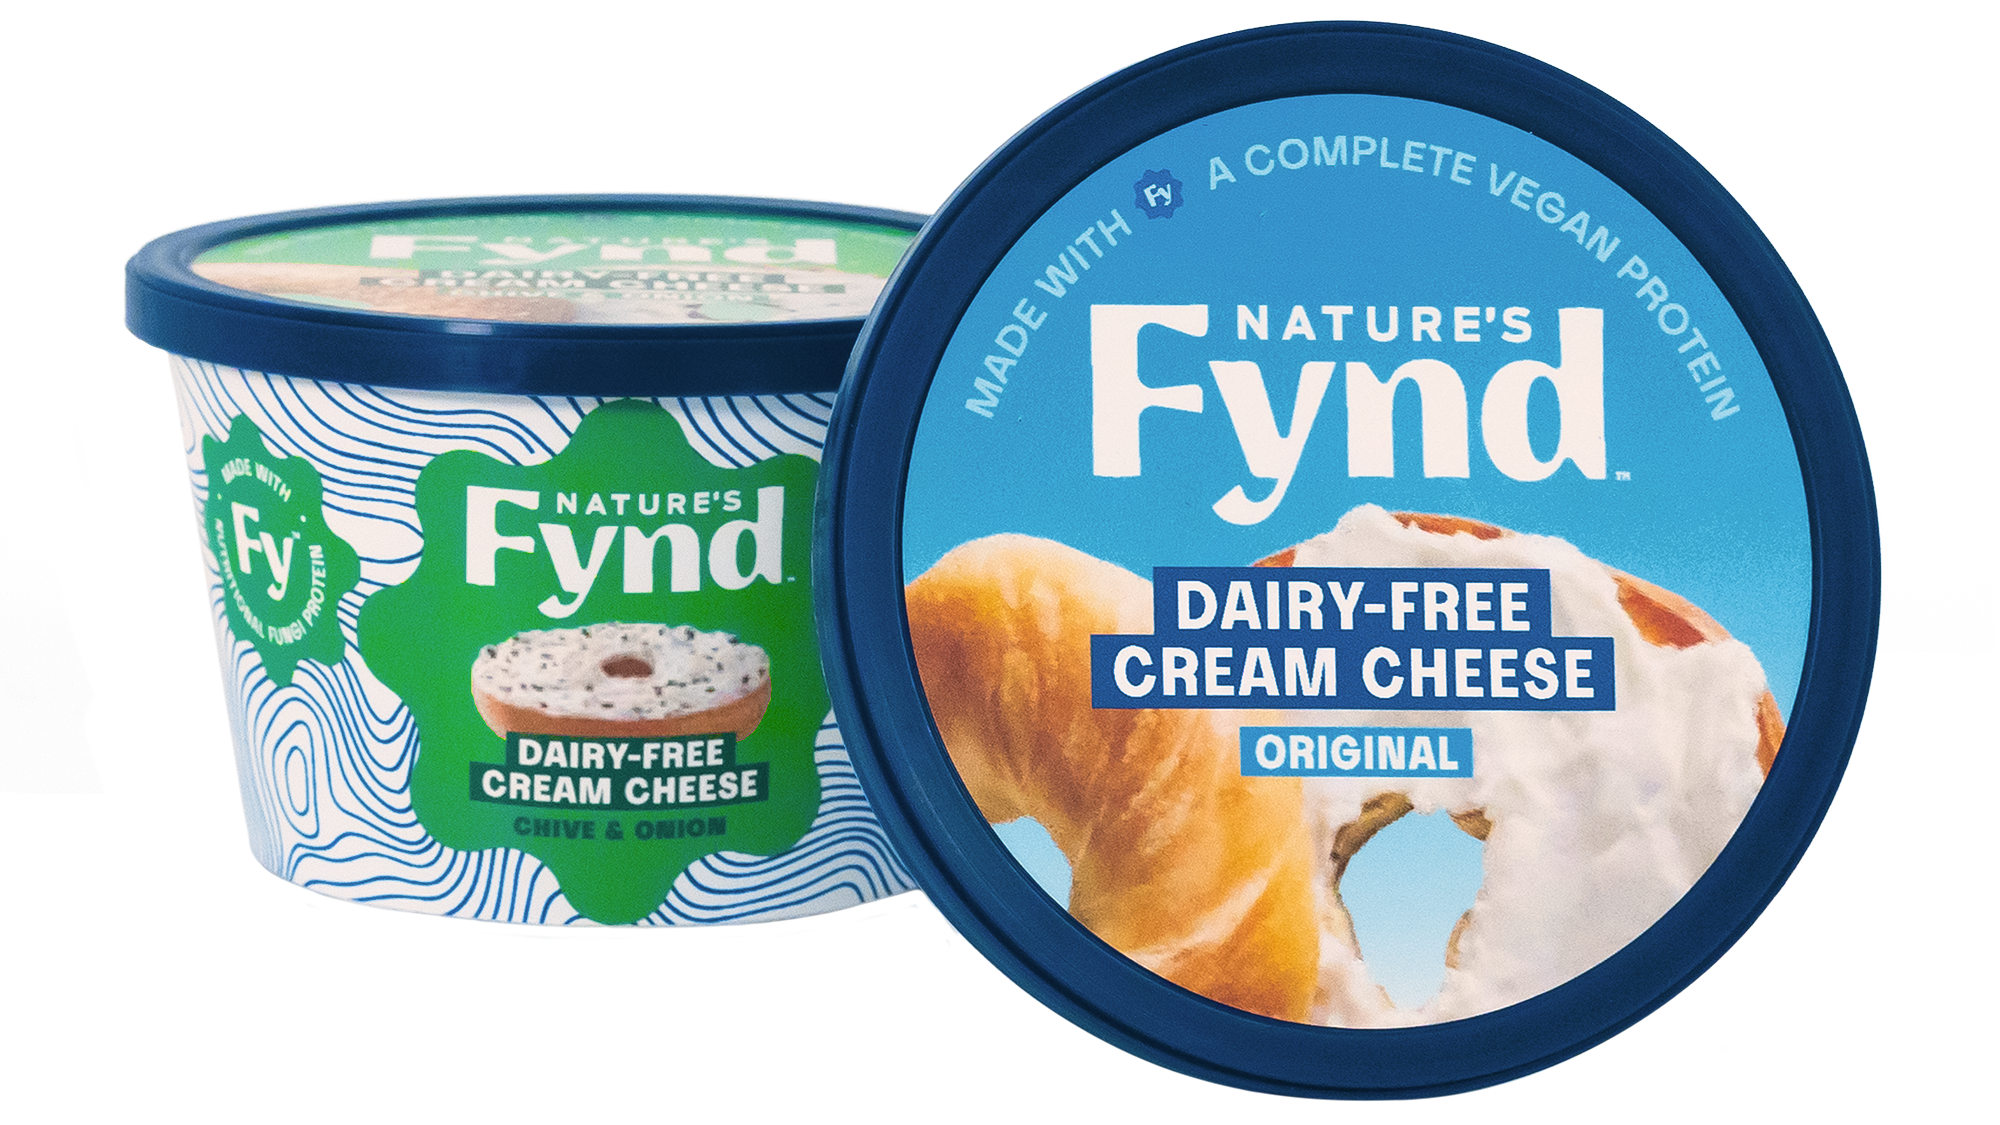 FREE Nature’s Fynd Dairy-Free Cream Cheese at Sprouts